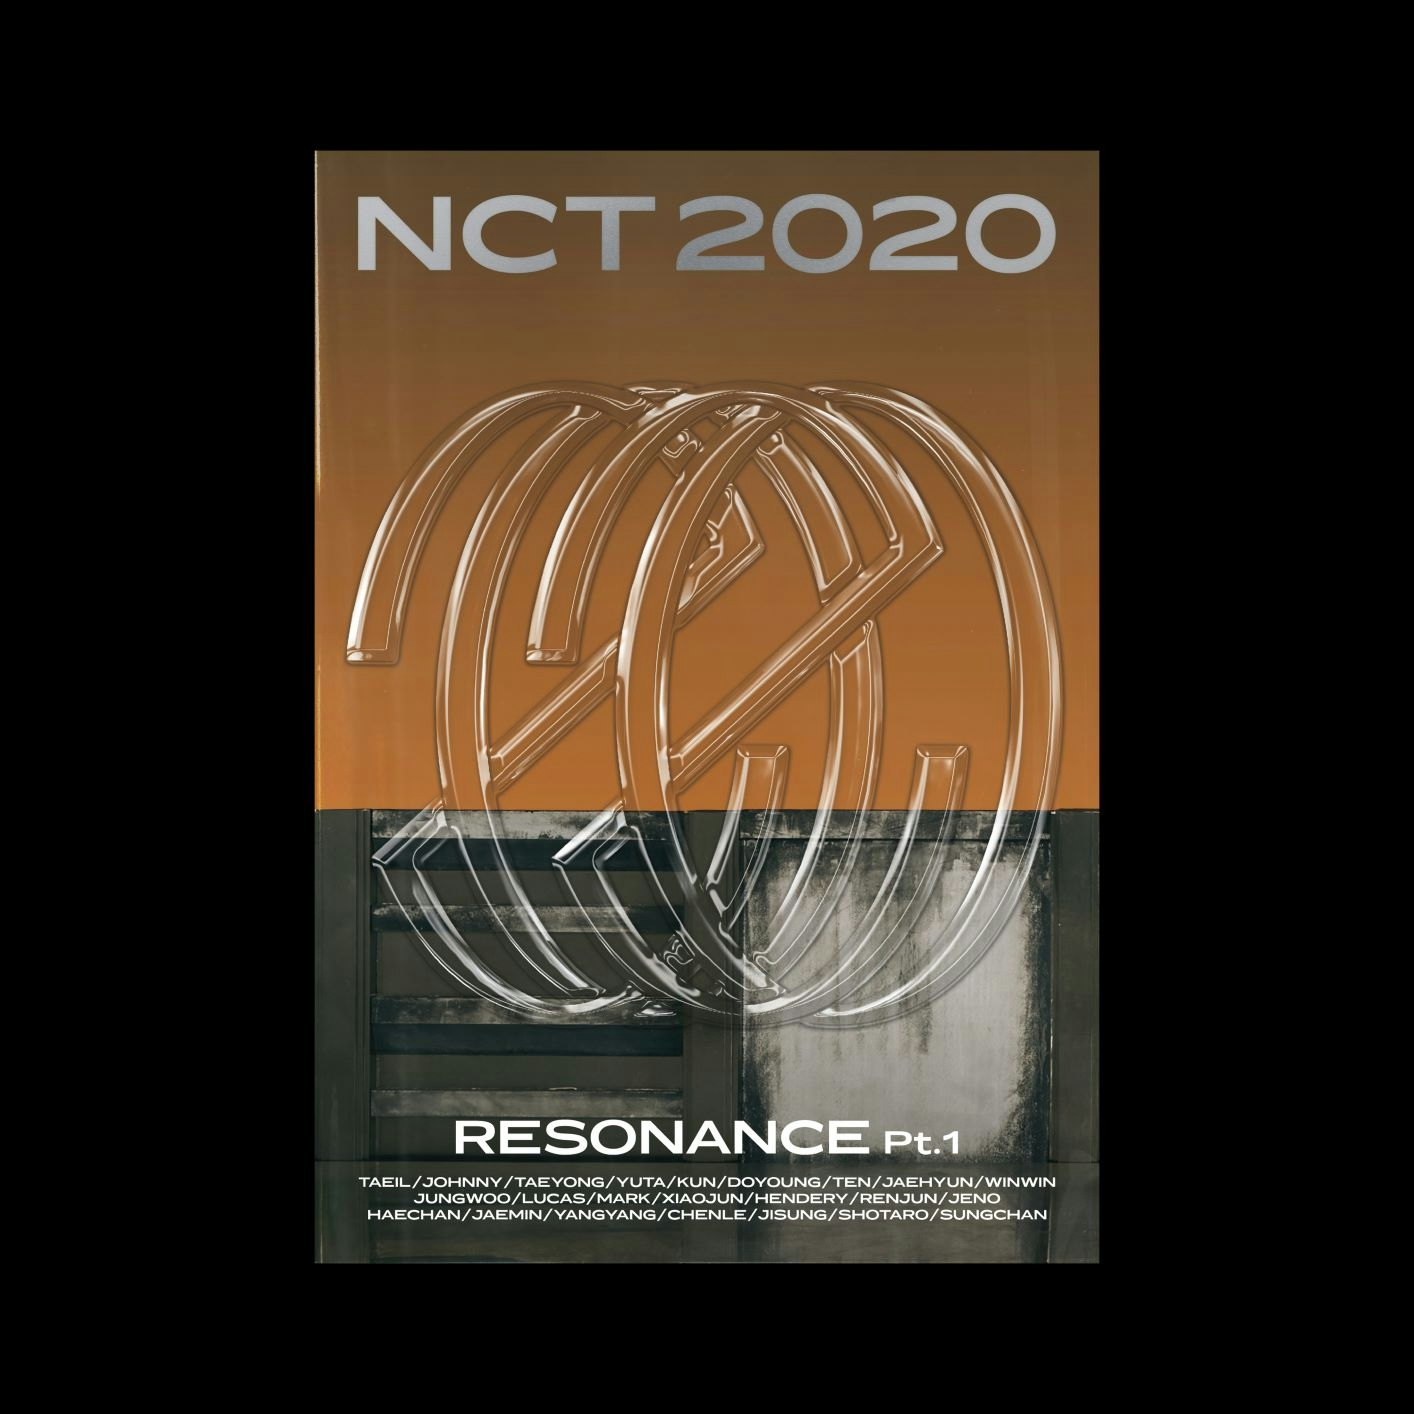 Album artwork for Album artwork for NCT - The 2nd Album RESONANCE Pt. 1 [The Future Ver.] by NCT by NCT - The 2nd Album RESONANCE Pt. 1 [The Future Ver.] - NCT